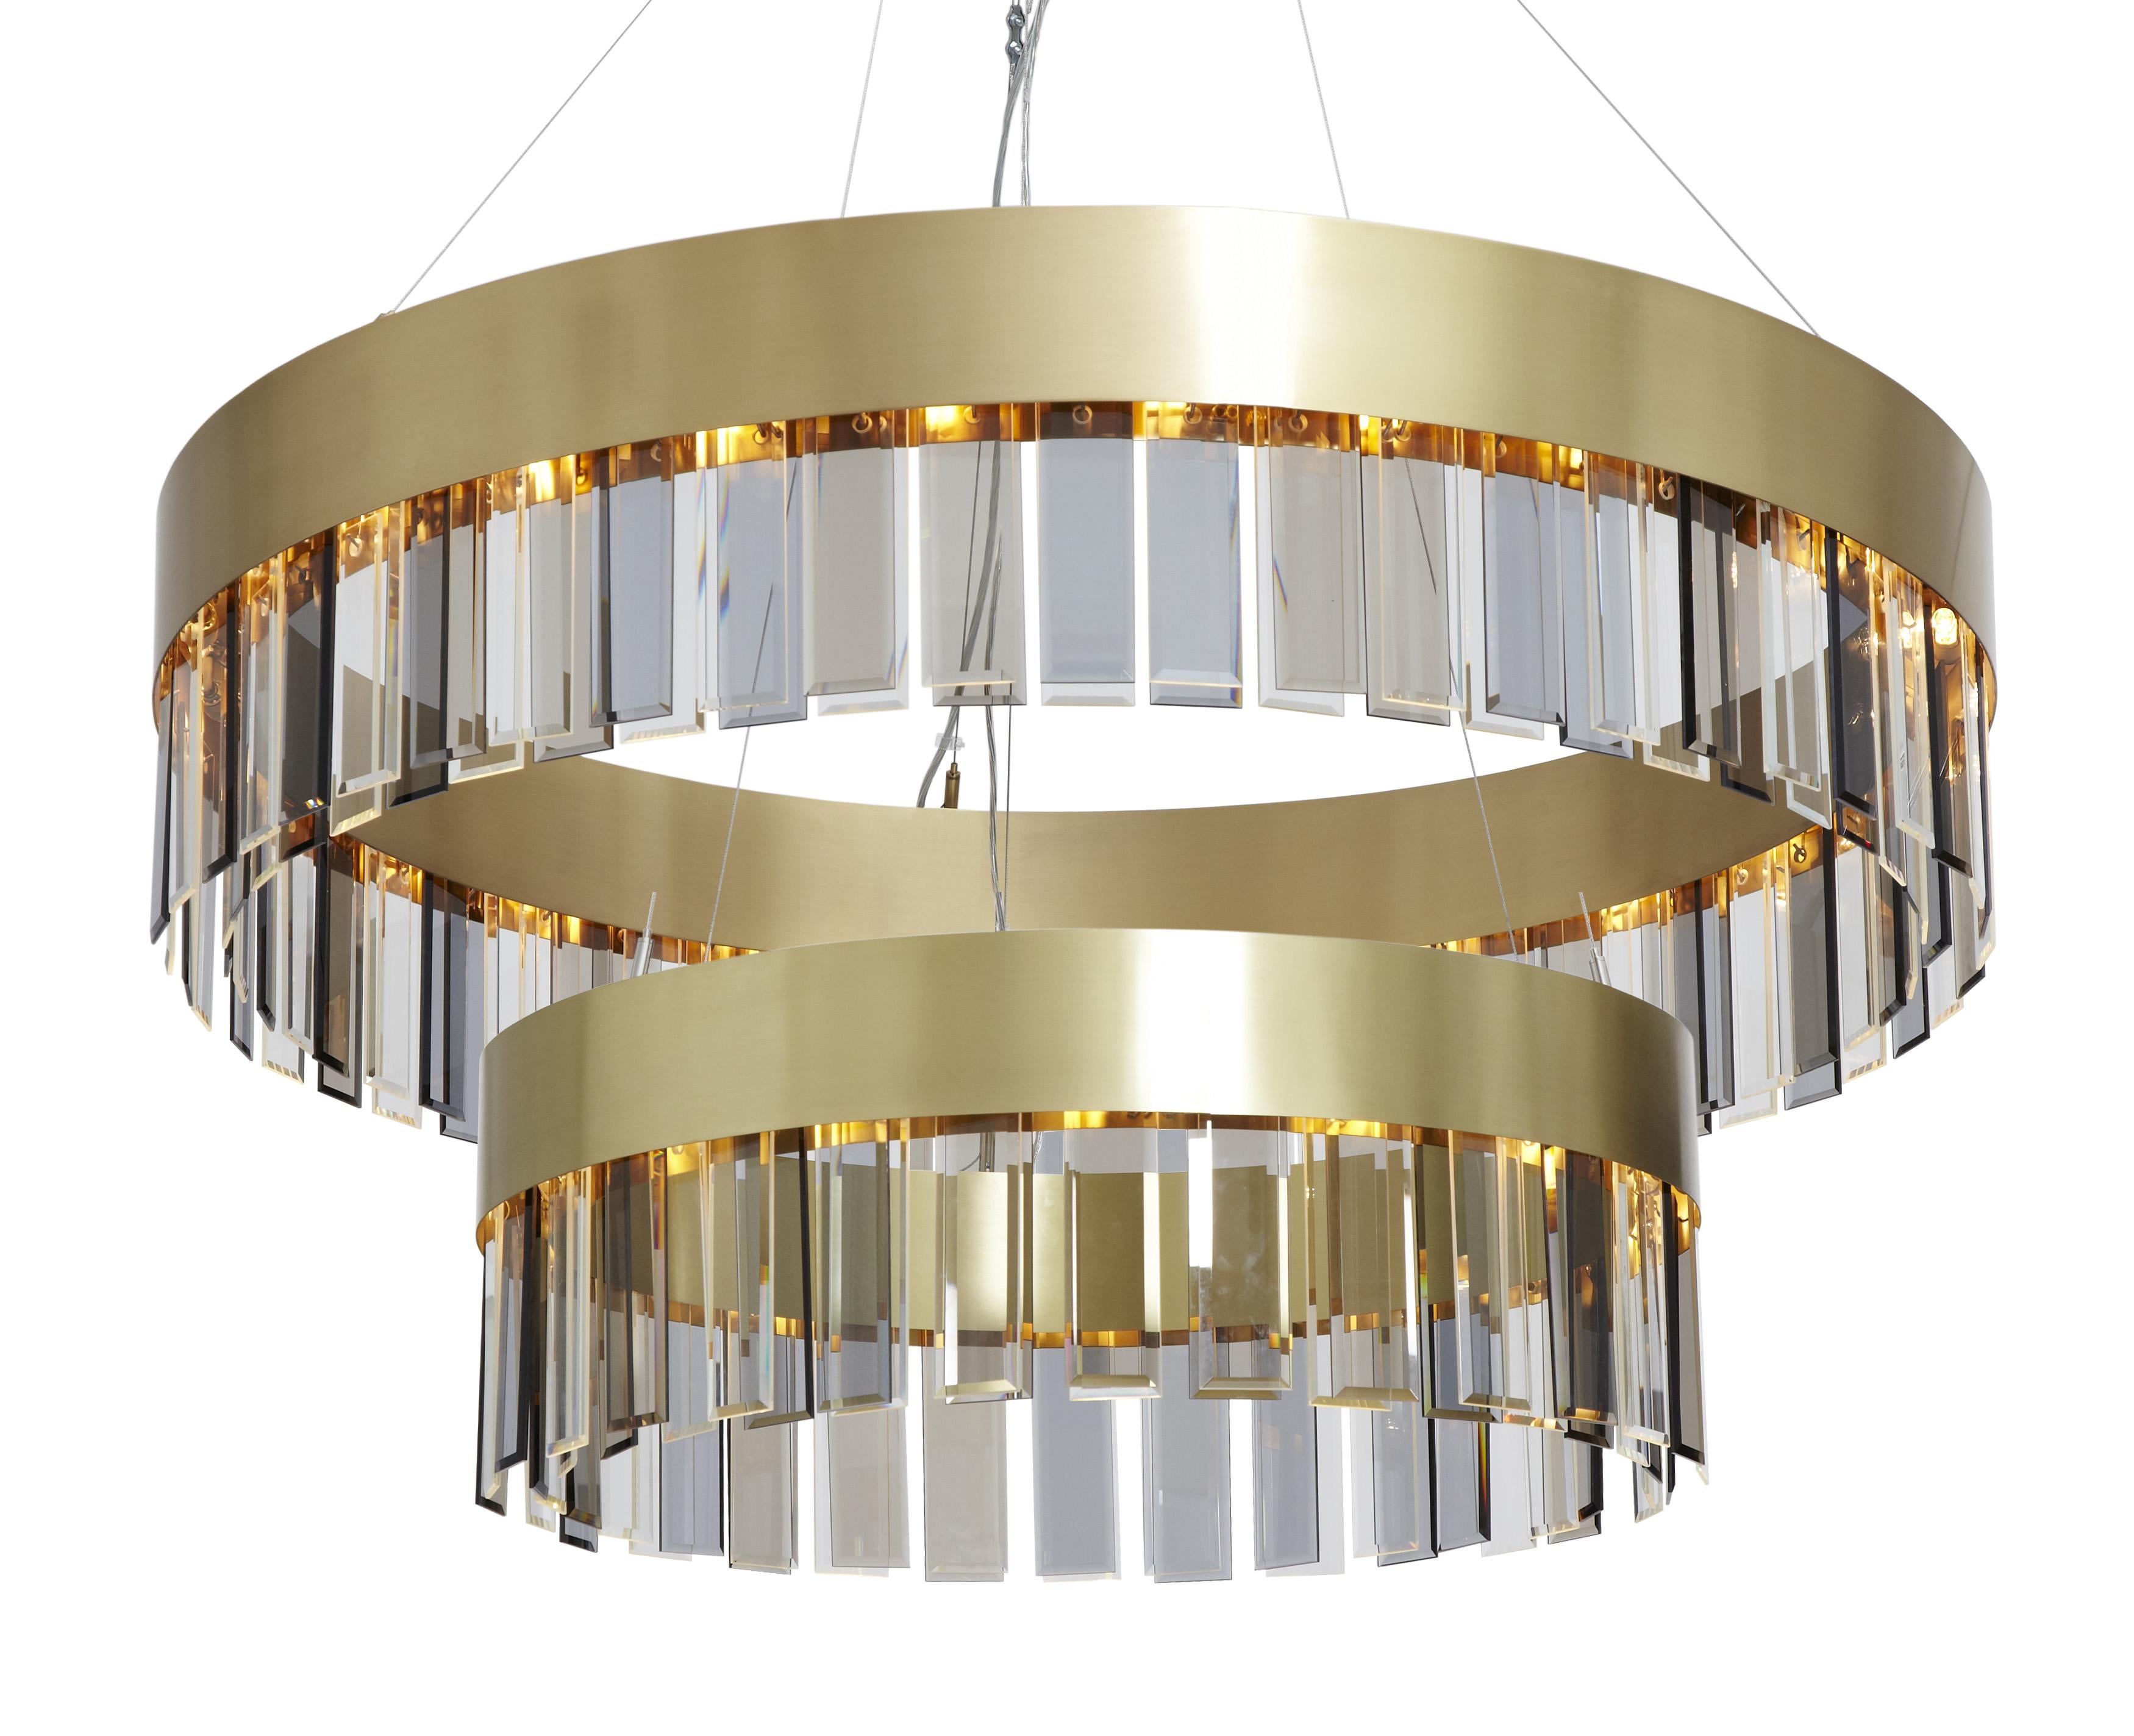 Solaris twin pendant by CTO Lighting
Materials: satin brass with cut glass drops and stainless steel suspension wire/clear flex
Dimensions: H 40 (min) x W 110 cm 

All our lamps can be wired according to each country. If sold to the USA it will